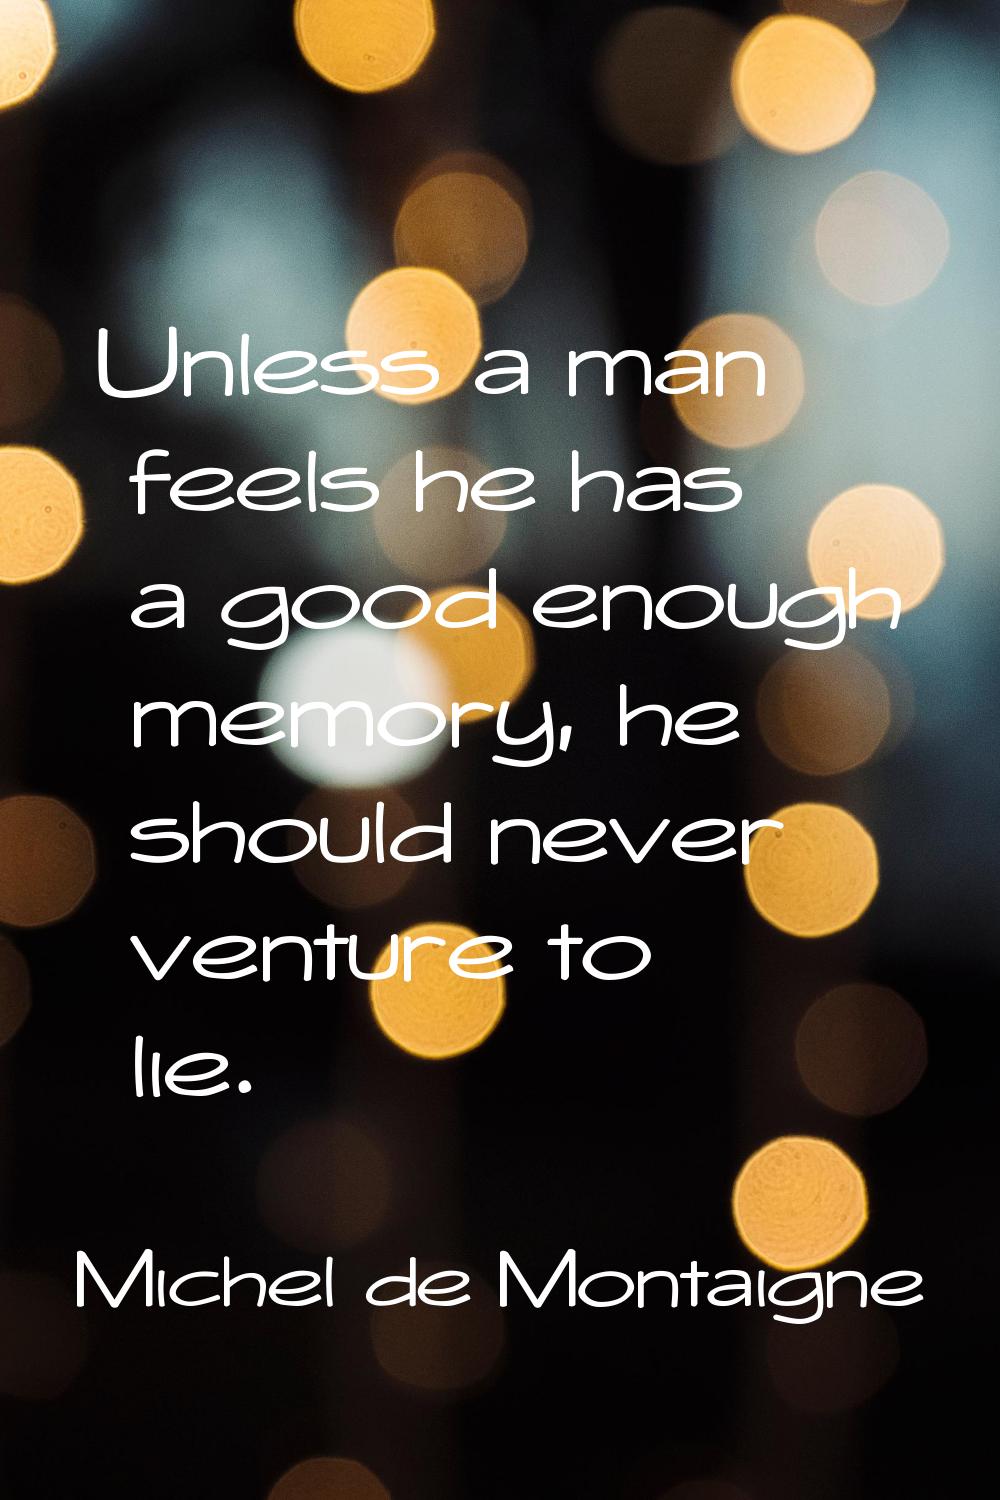 Unless a man feels he has a good enough memory, he should never venture to lie.